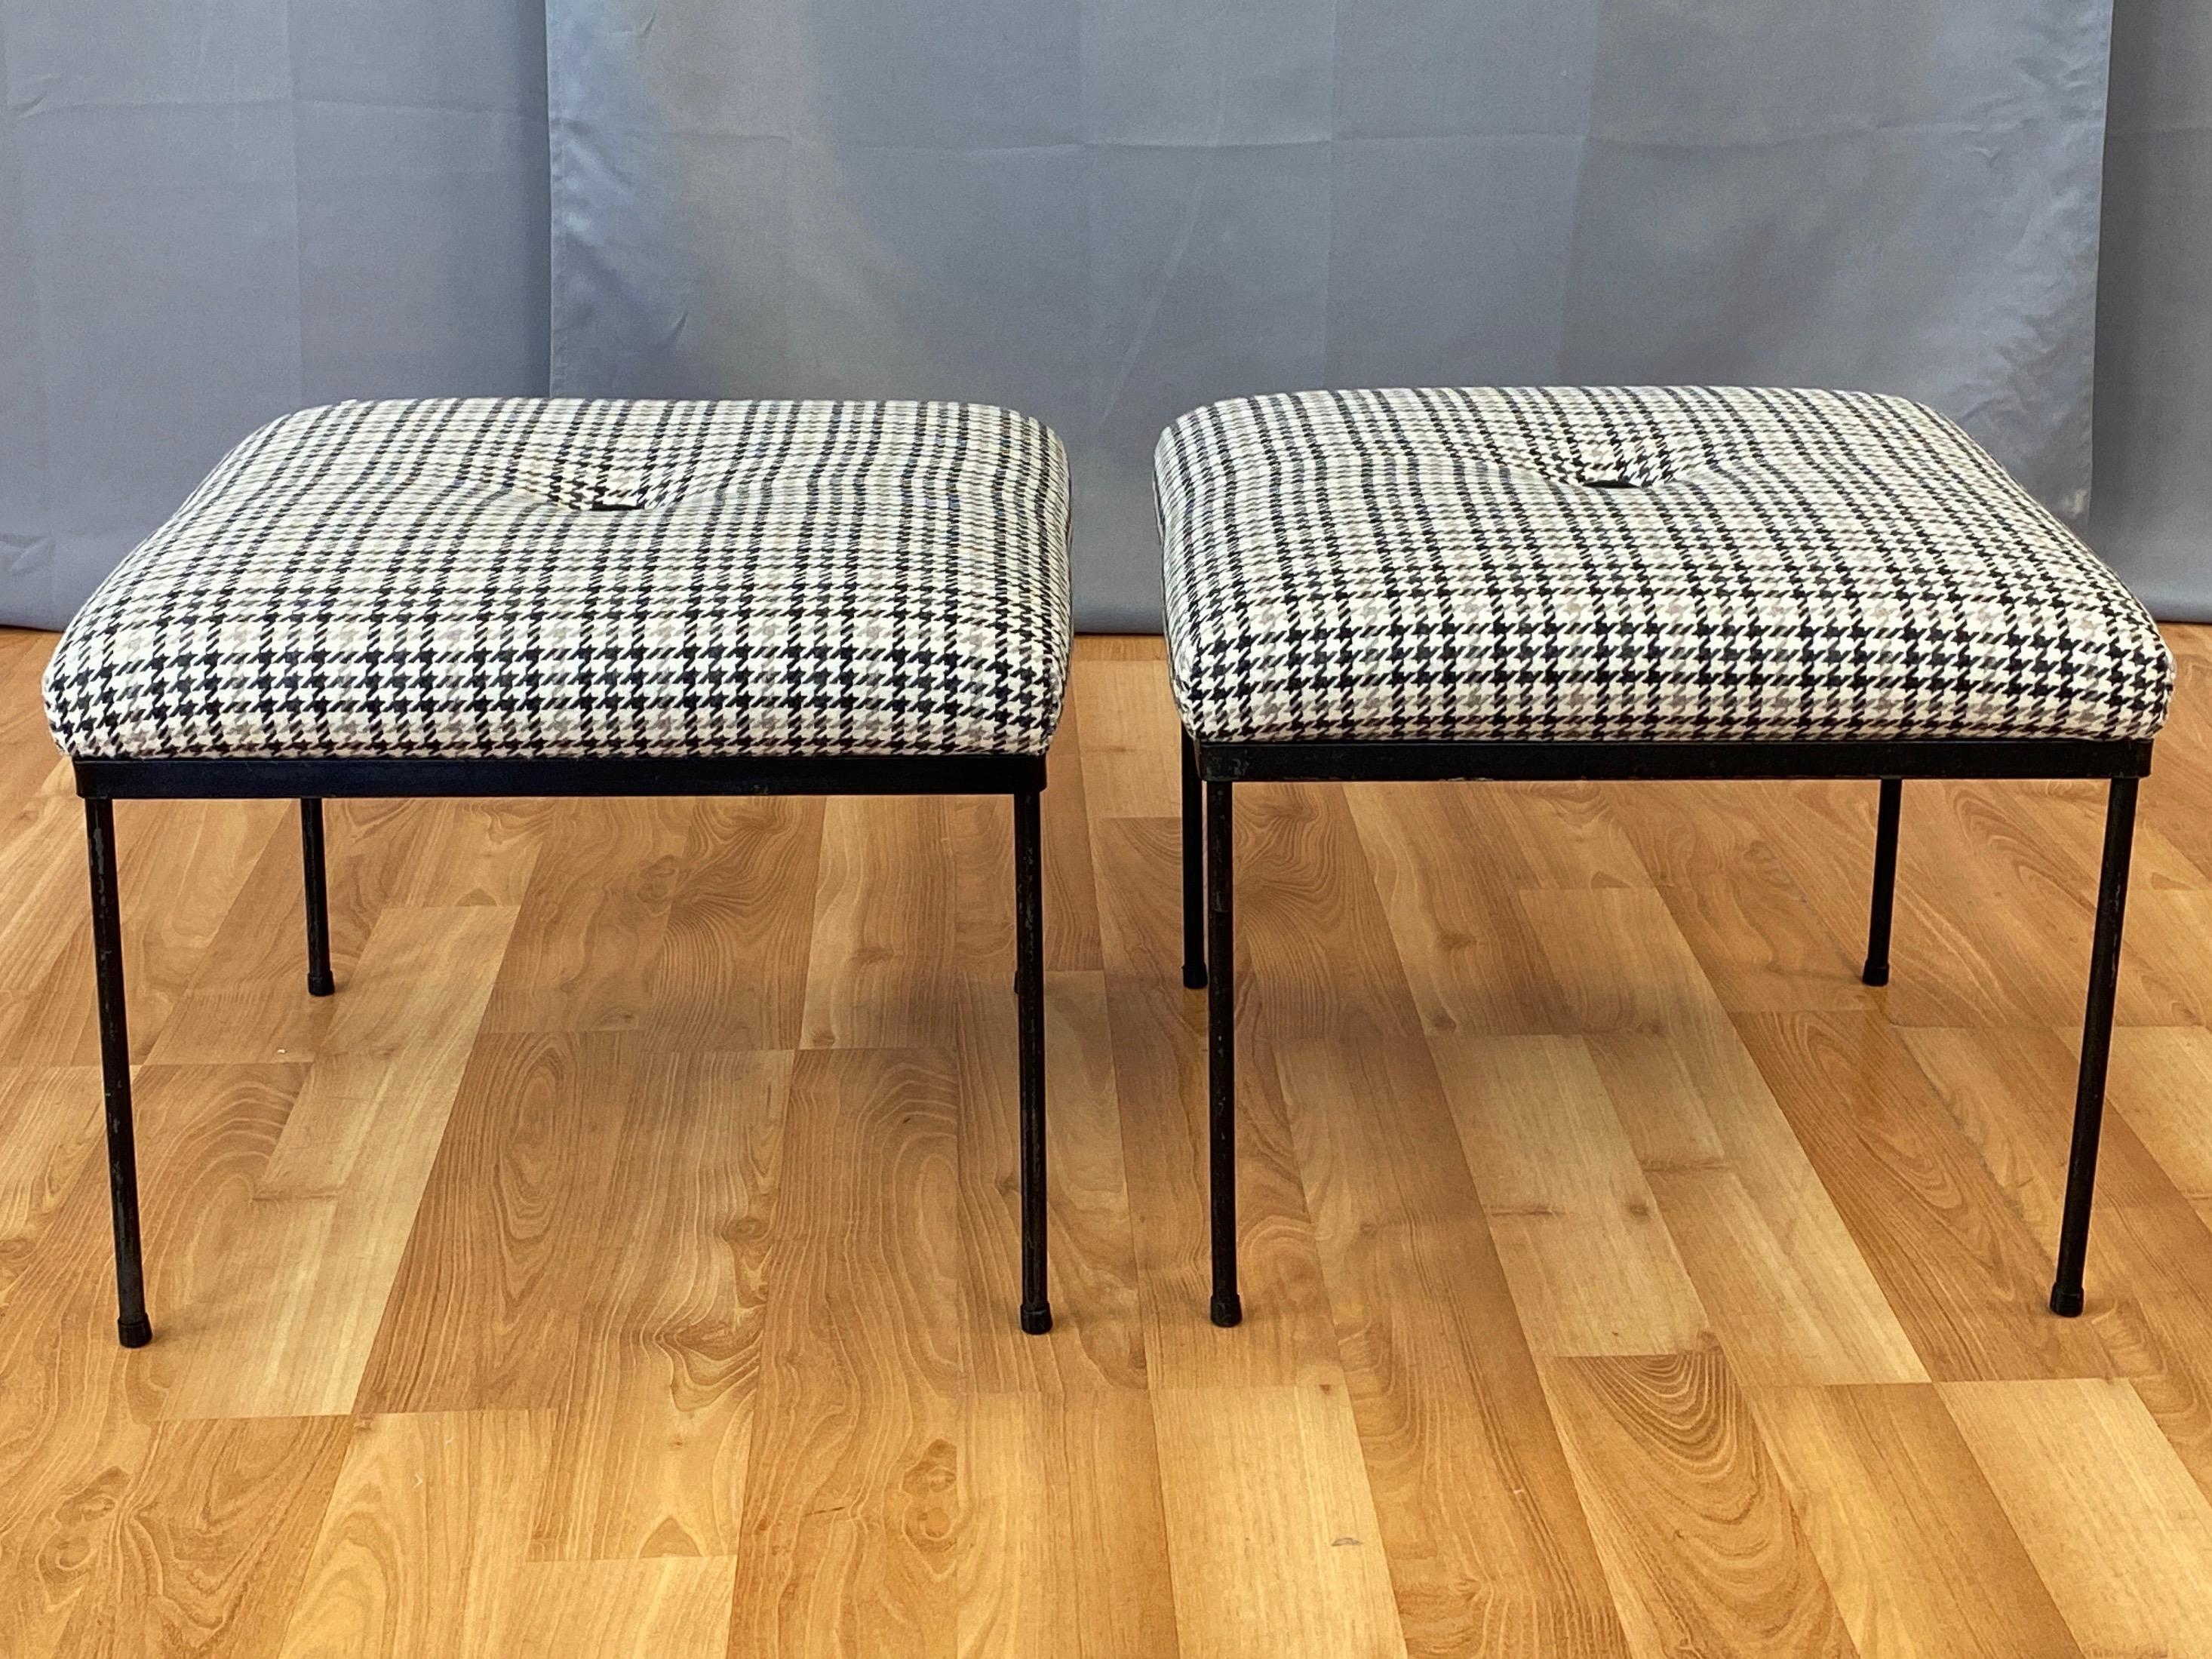 American Pair of Paul McCobb-Style Houndstooth Upholstered Ottomans by Mallin, 1950s